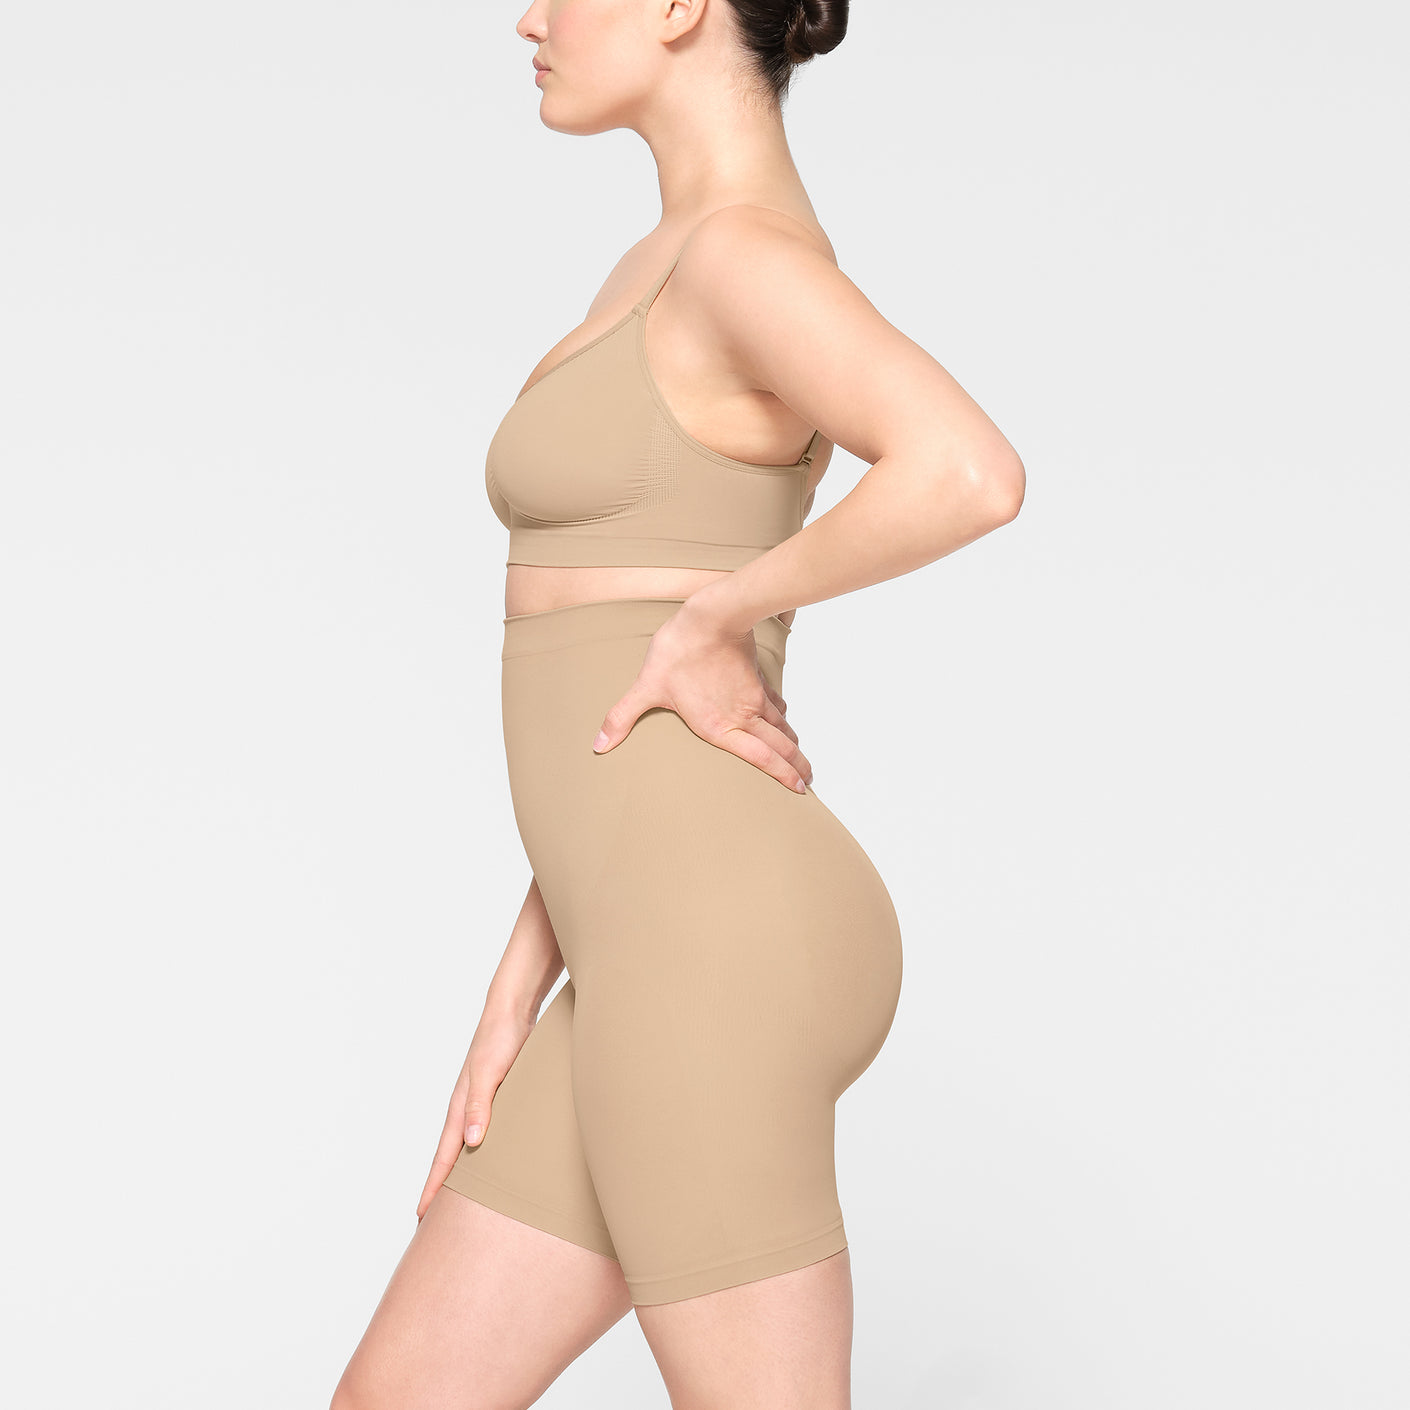 Sculpt your body with Spanx products